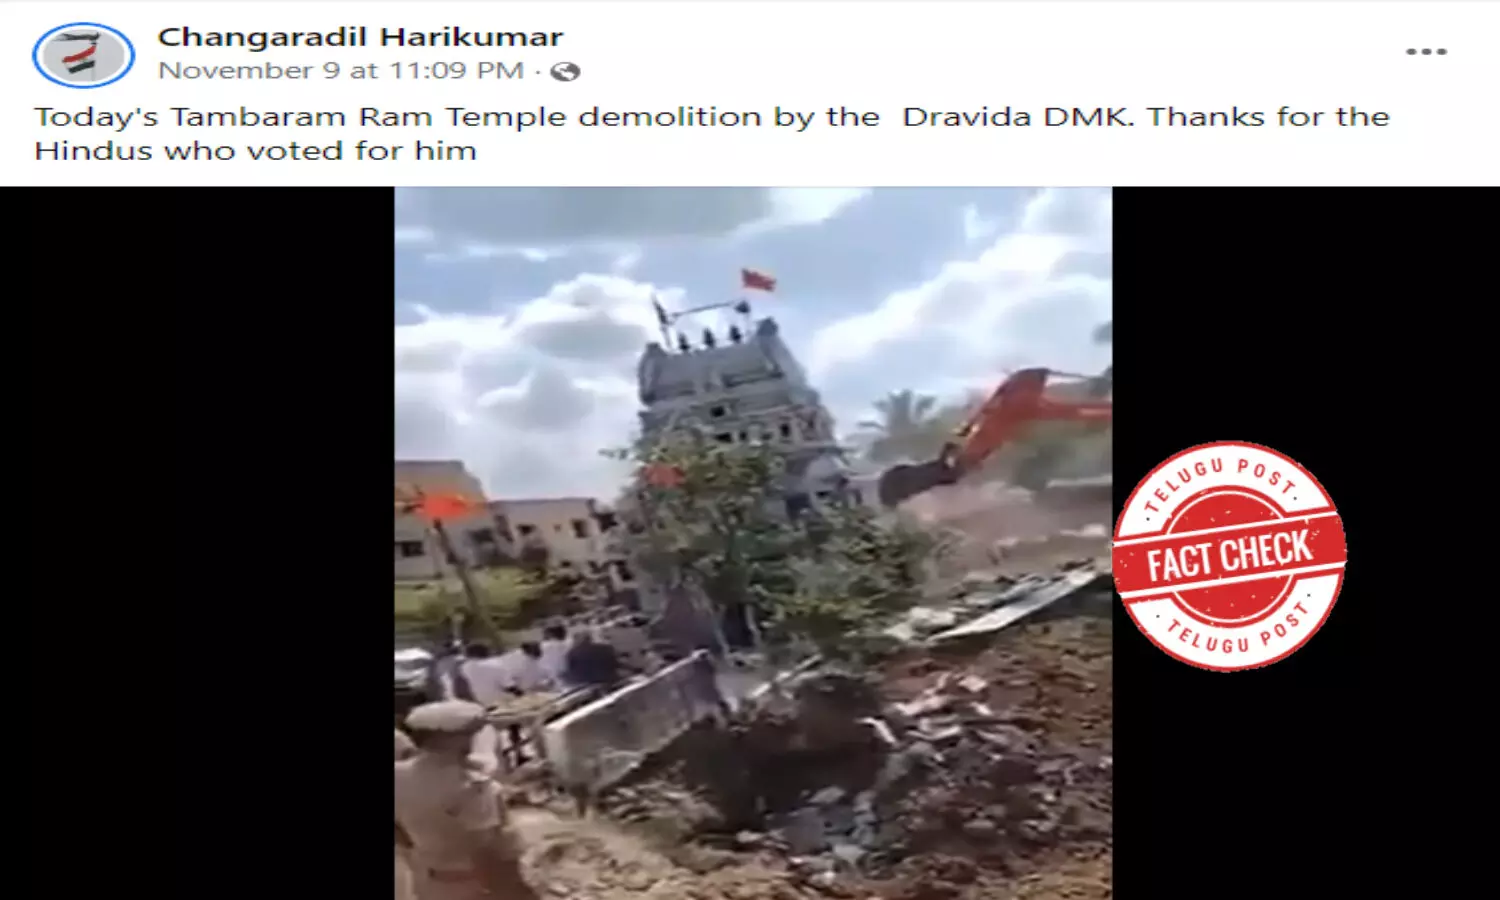 Fact Check: Video claiming DMK govt. targeting Hindu temples in Tamil Nadu is MISLEADING